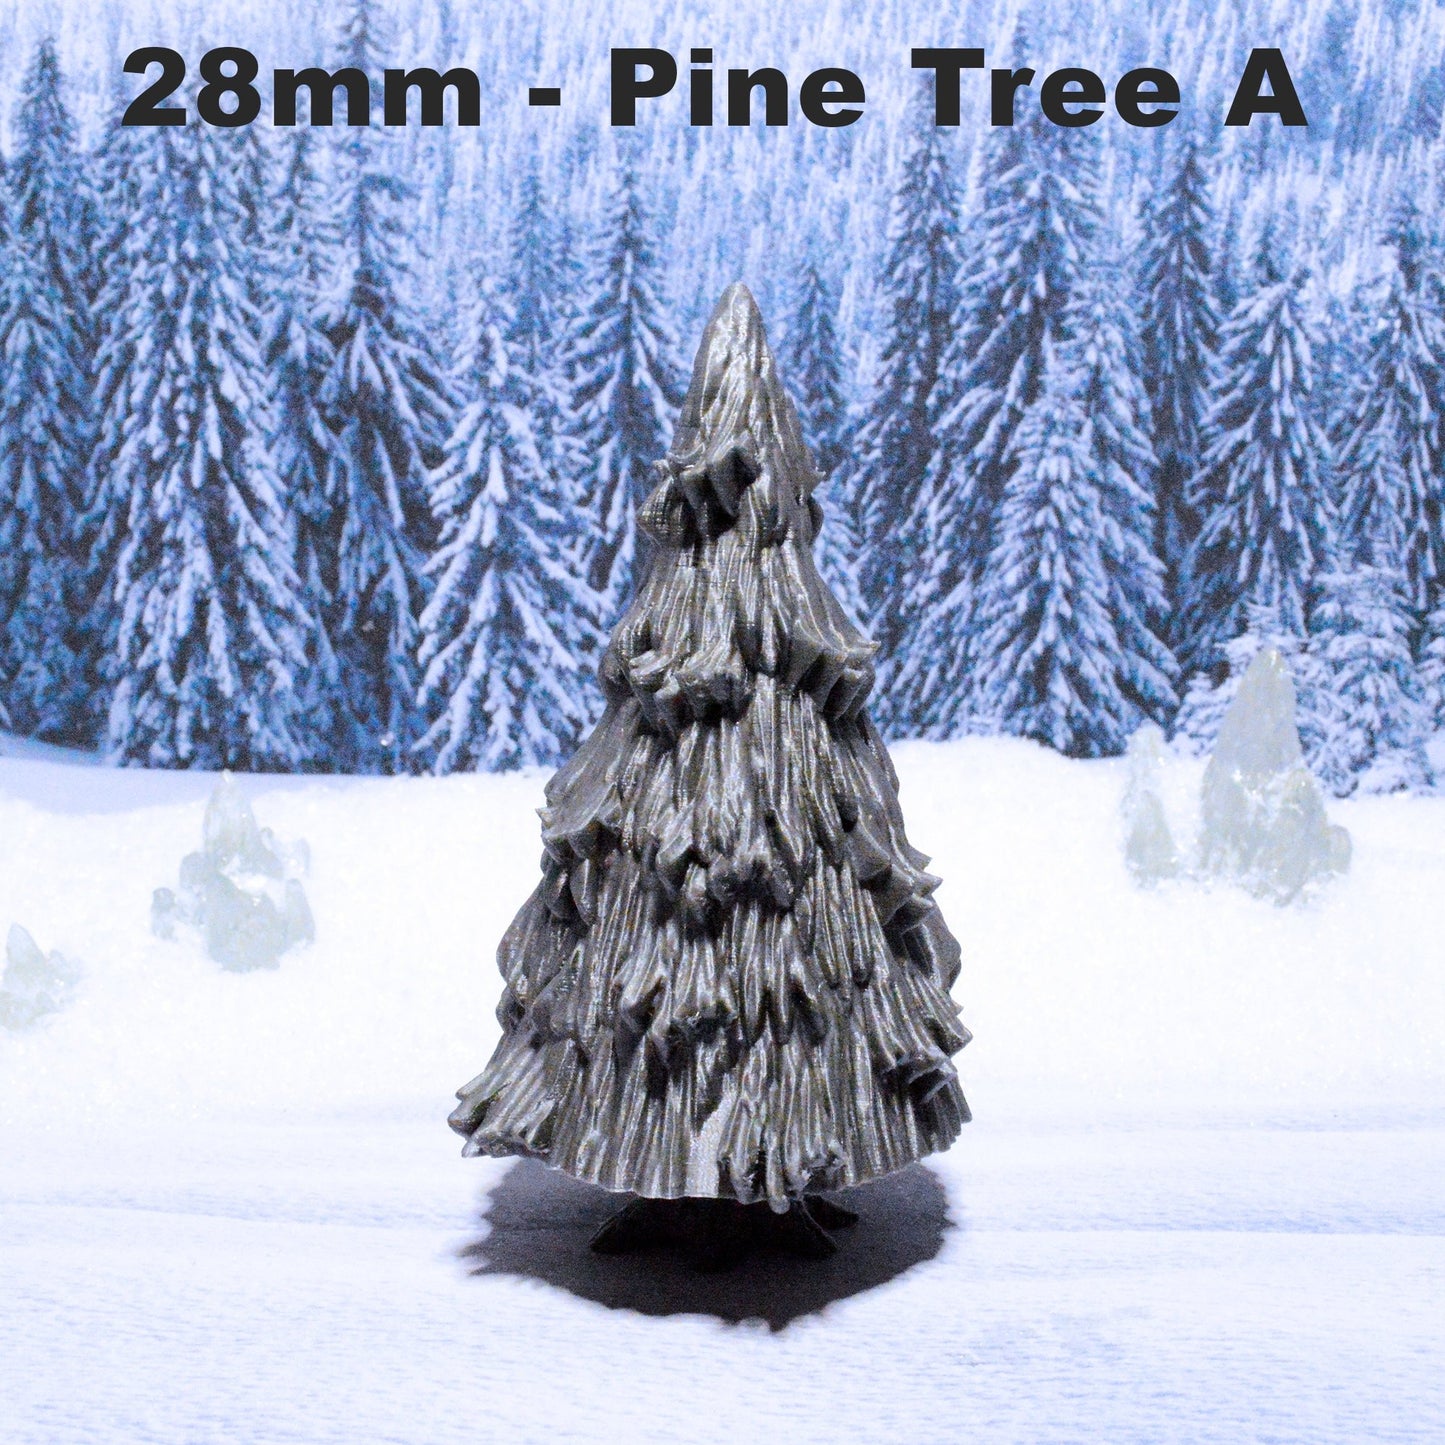 Miniature Pine Trees 15mm 28mm 32mm for D&D Terrain, DnD Pathfinder Wargame Forest, Gift for Tabletop Gamers and Diorama Enthusiasts